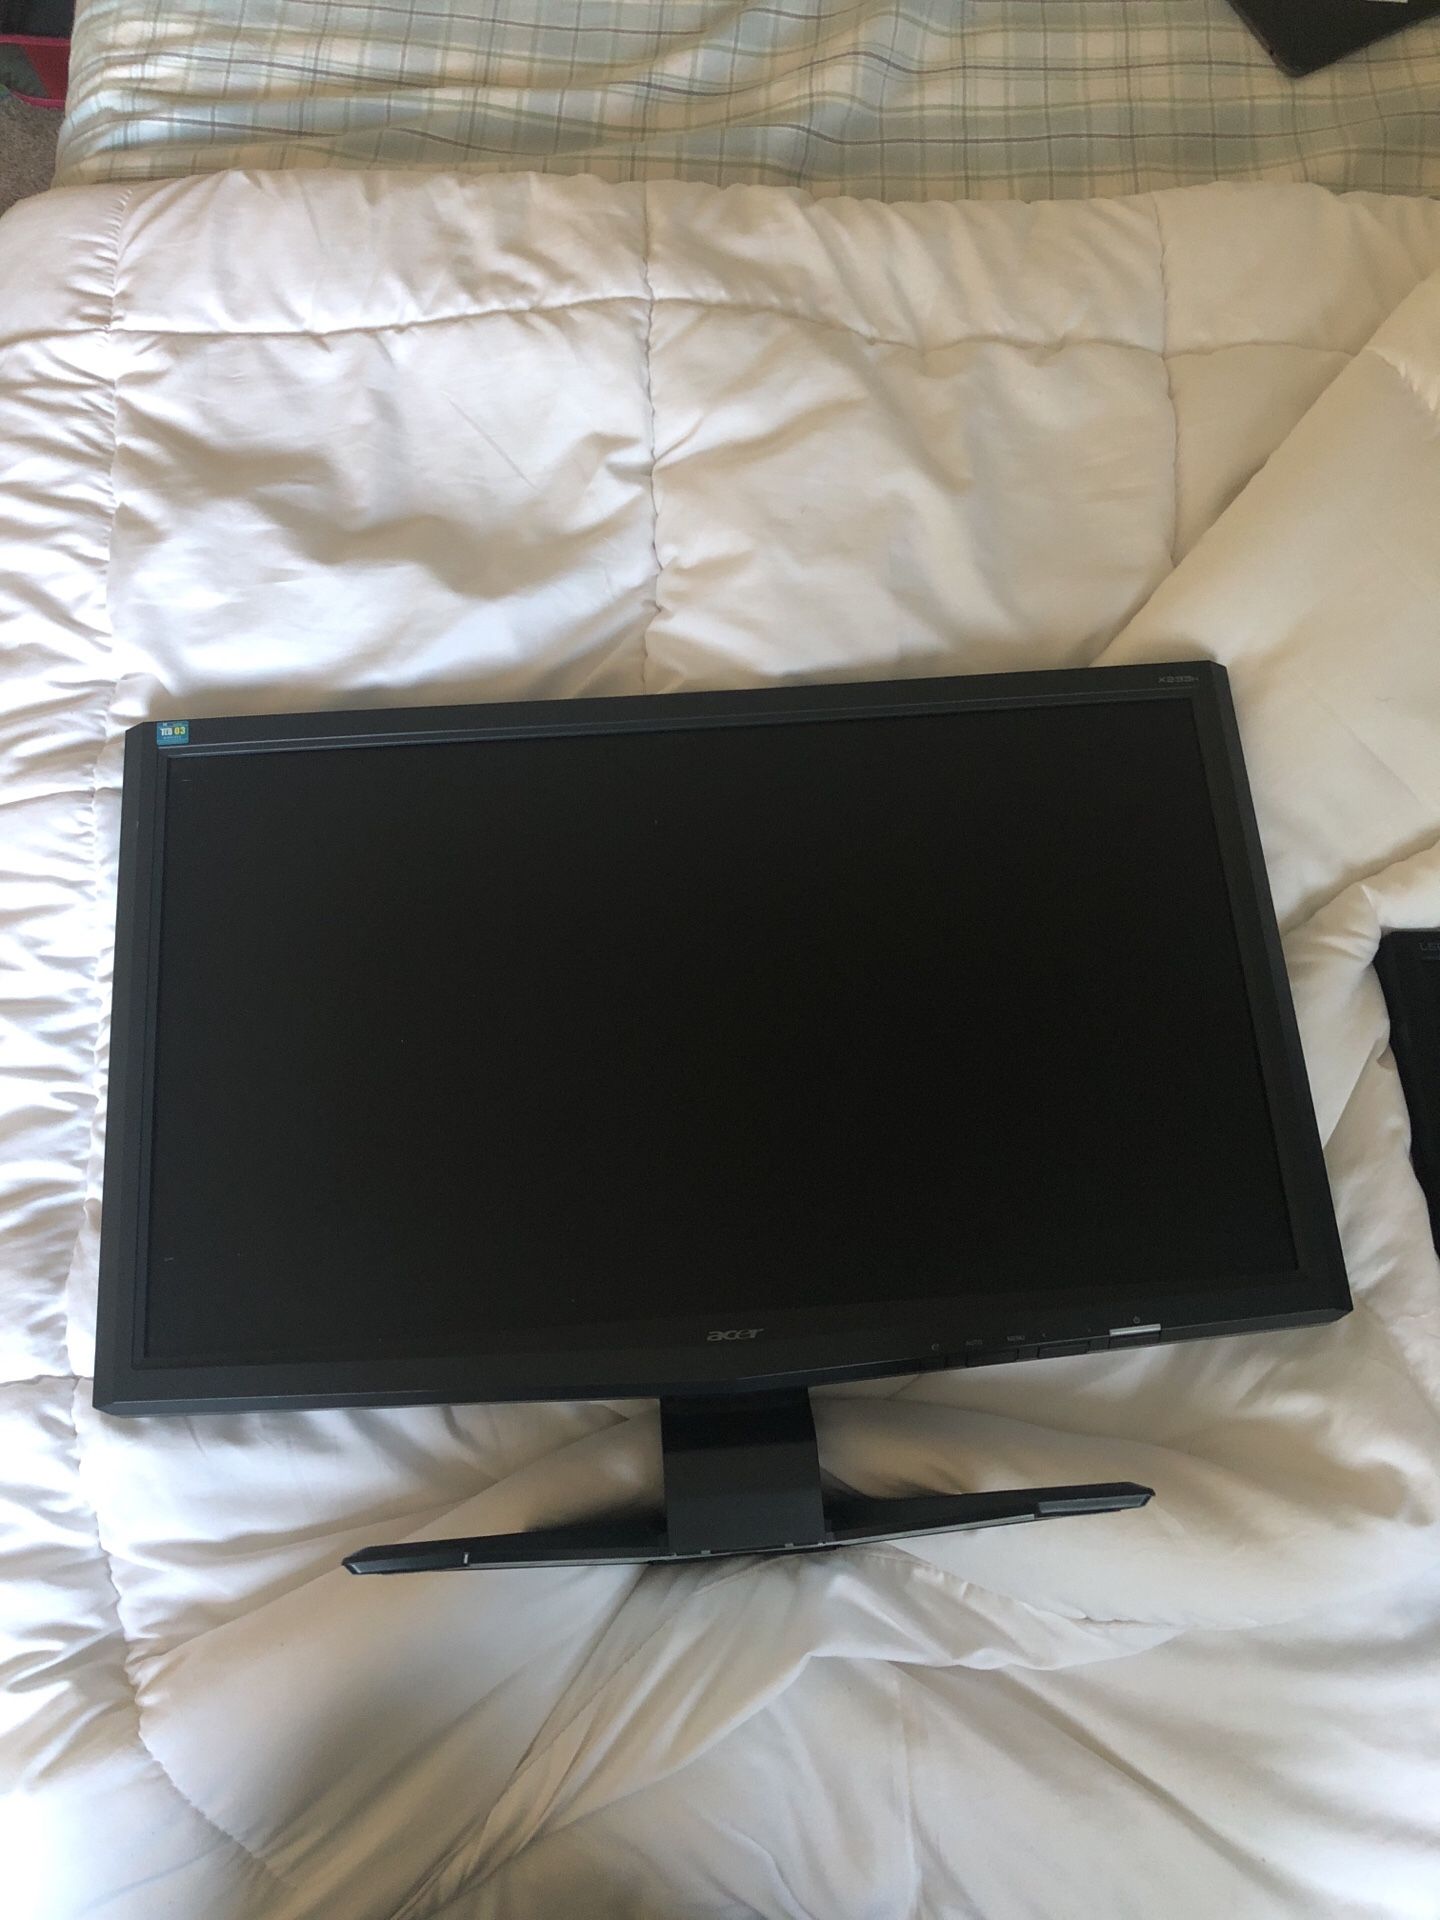 Acer 21.5 inch monitor